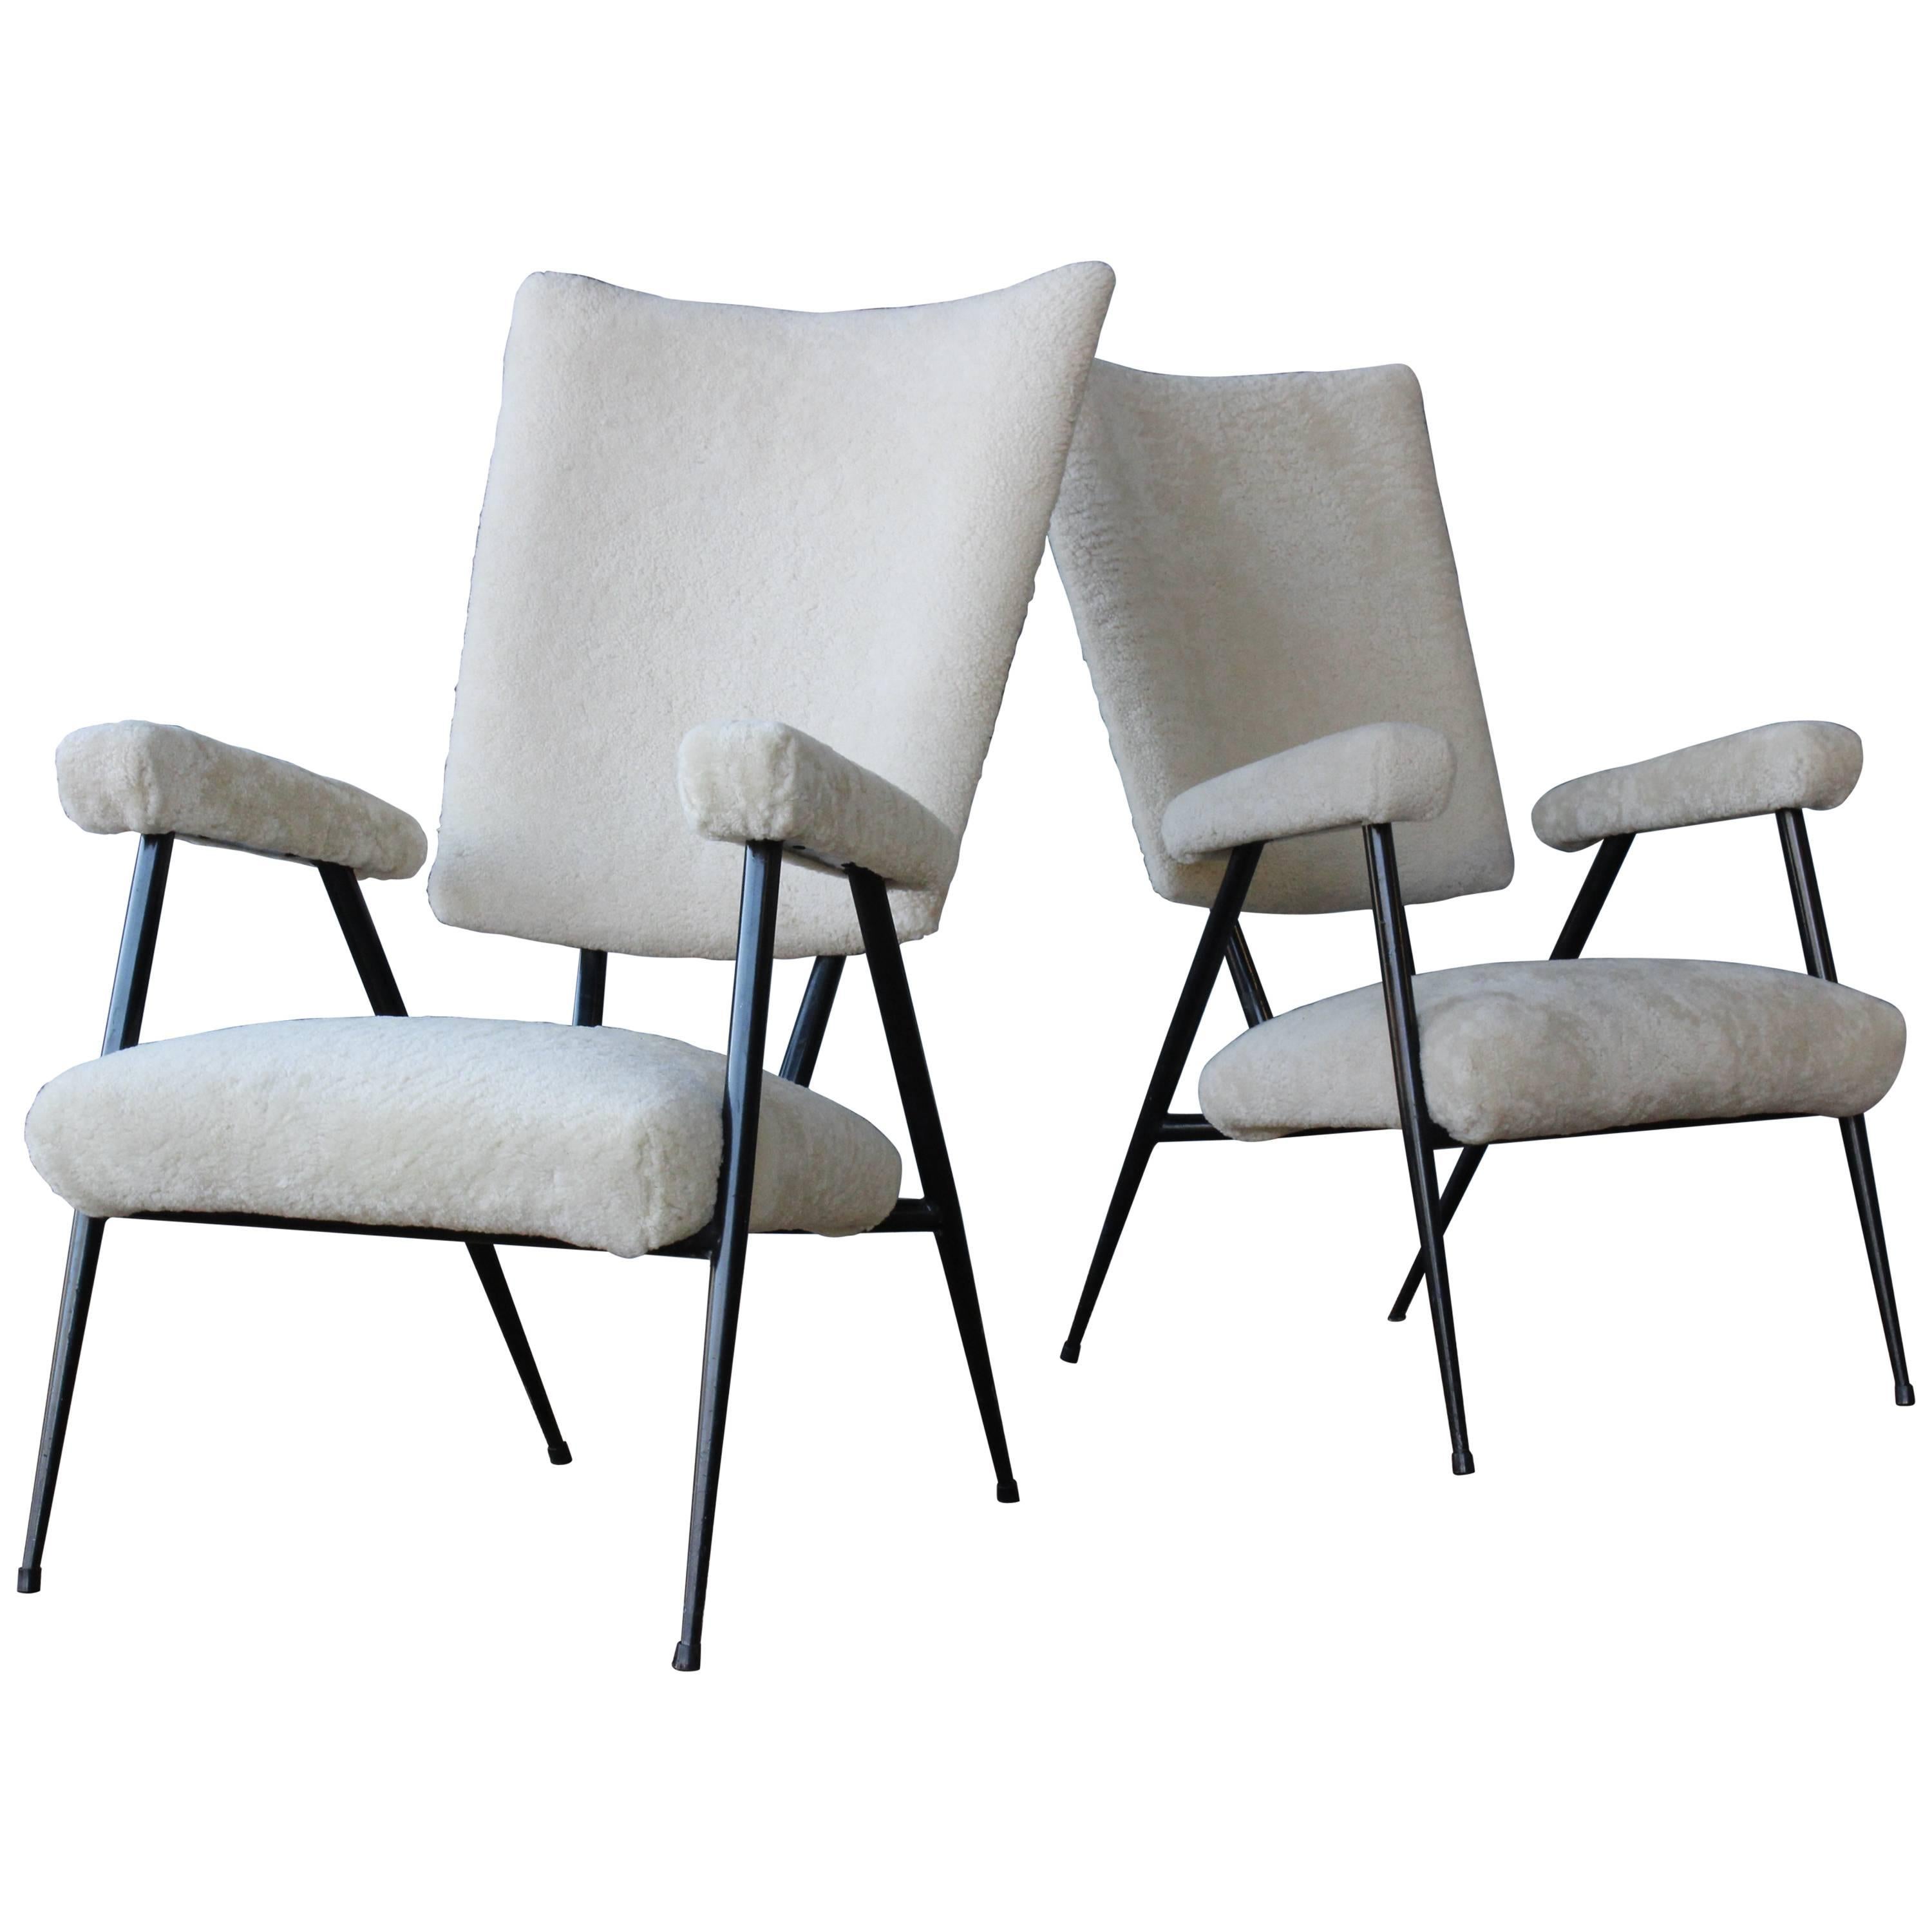 Pair of Metal Frame Armchairs in Sheepskin, Italy, 1960s